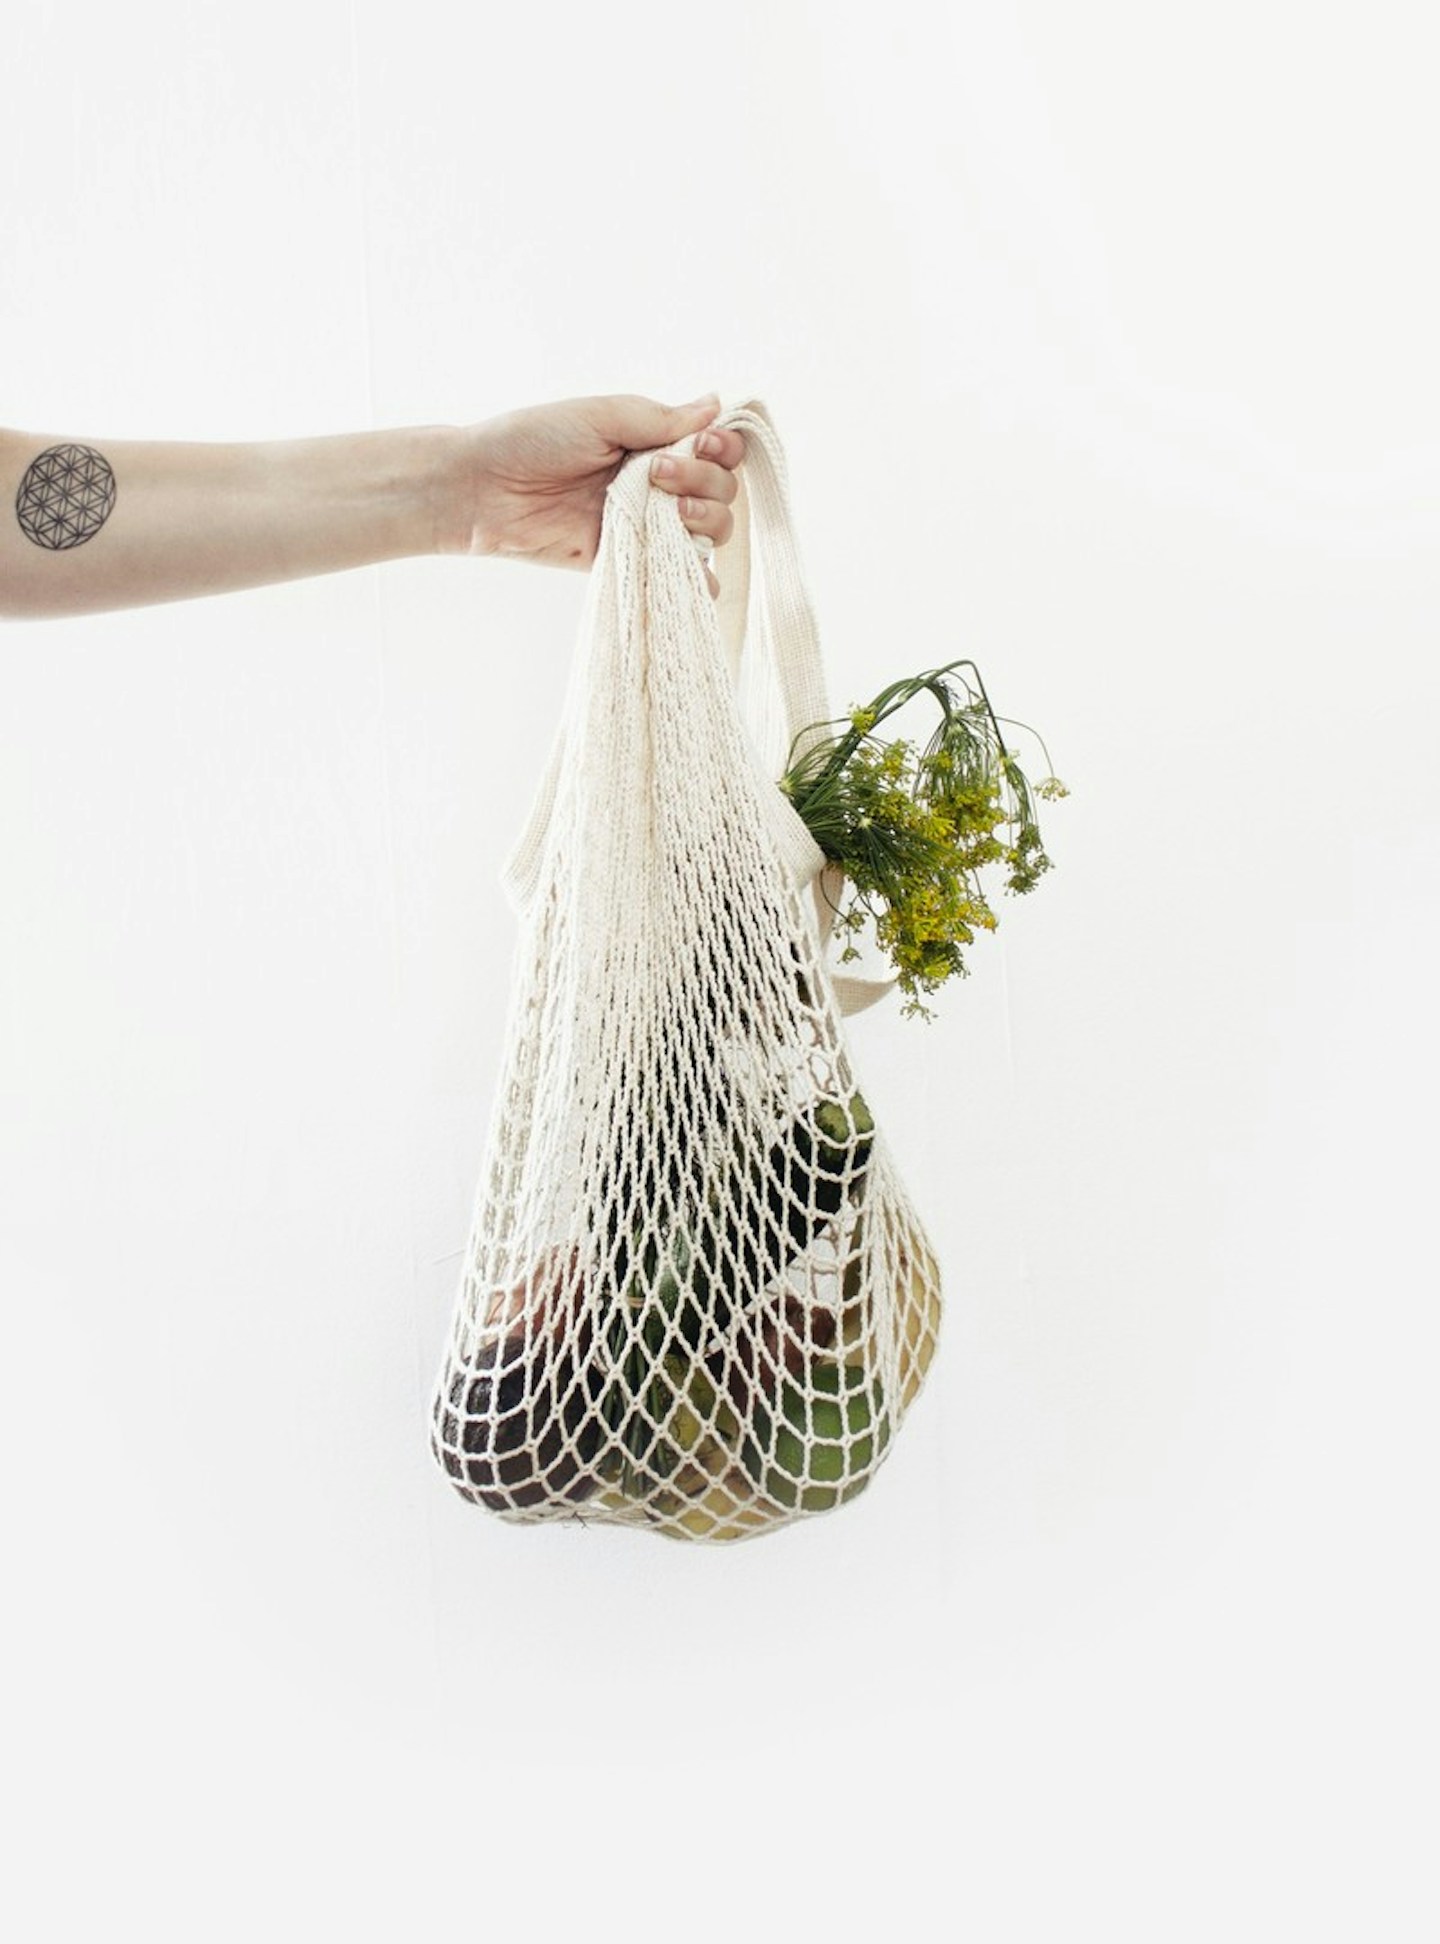 6 easy ways to have a sustainable life: reusable bags